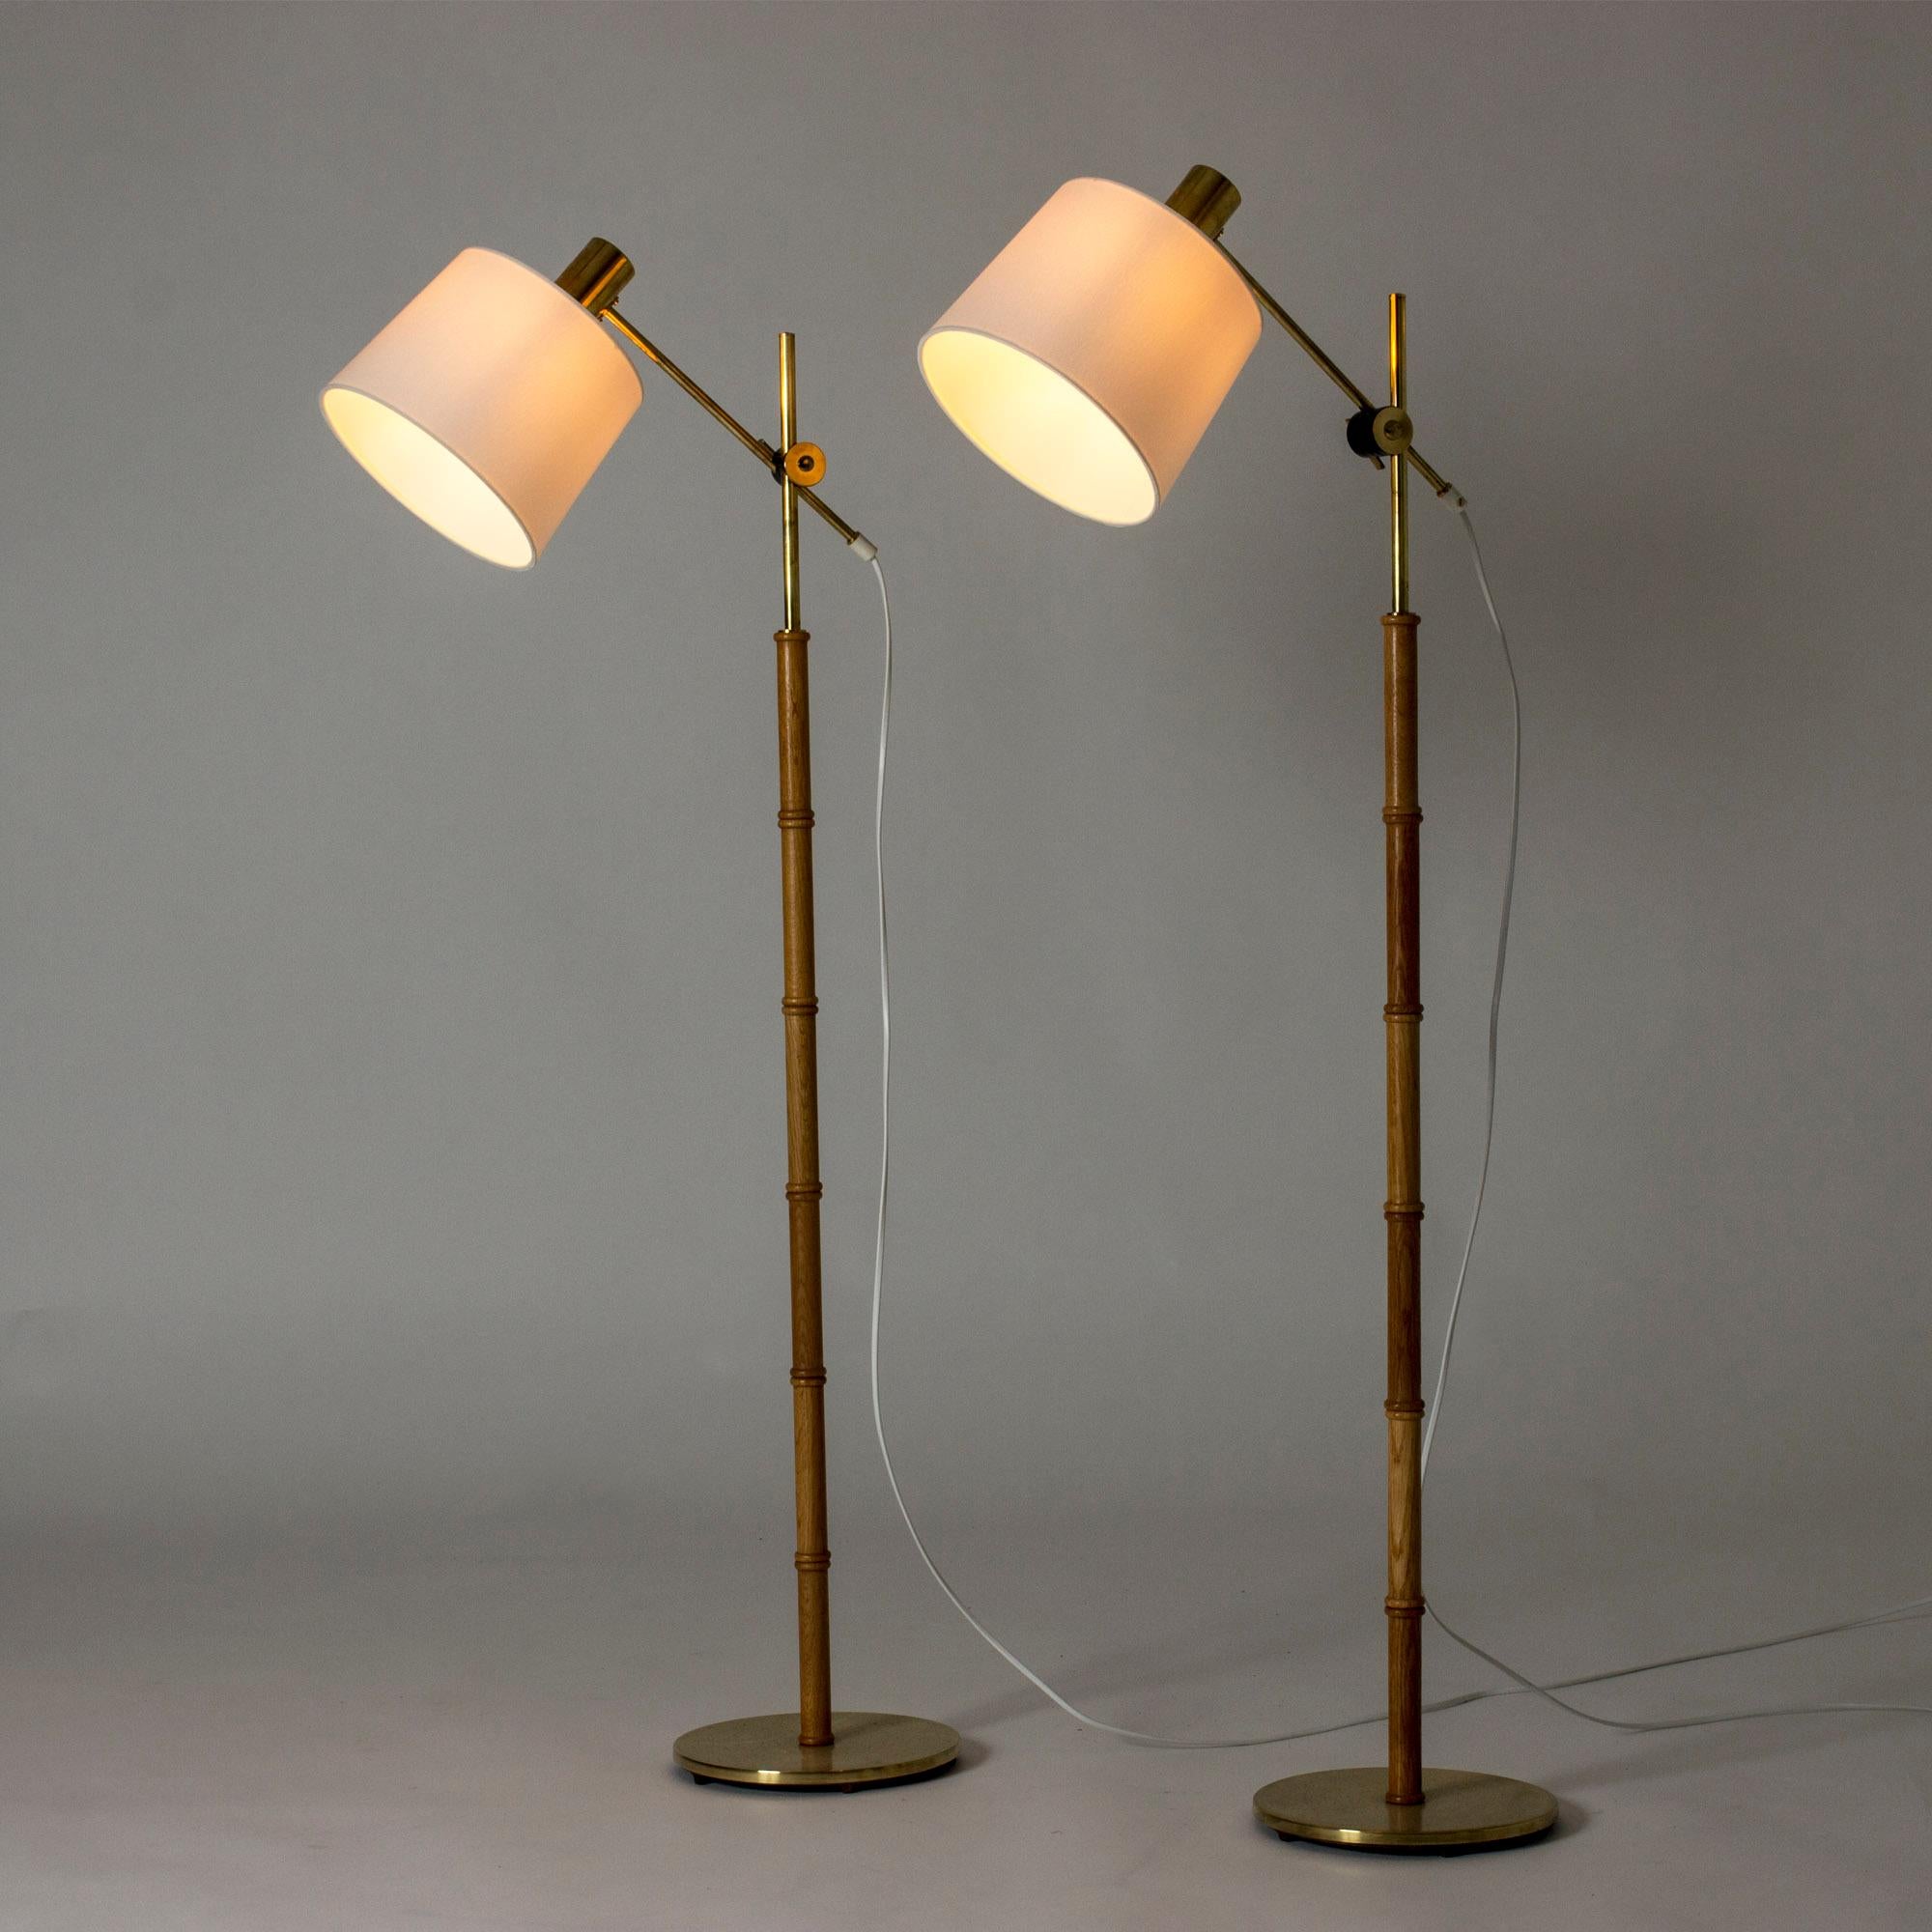 Pair of cool floor lamps from Falkenbergs Belysning, made from brass and oak sculpted in a bamboo stem design. Shades adjustable in height and angles.